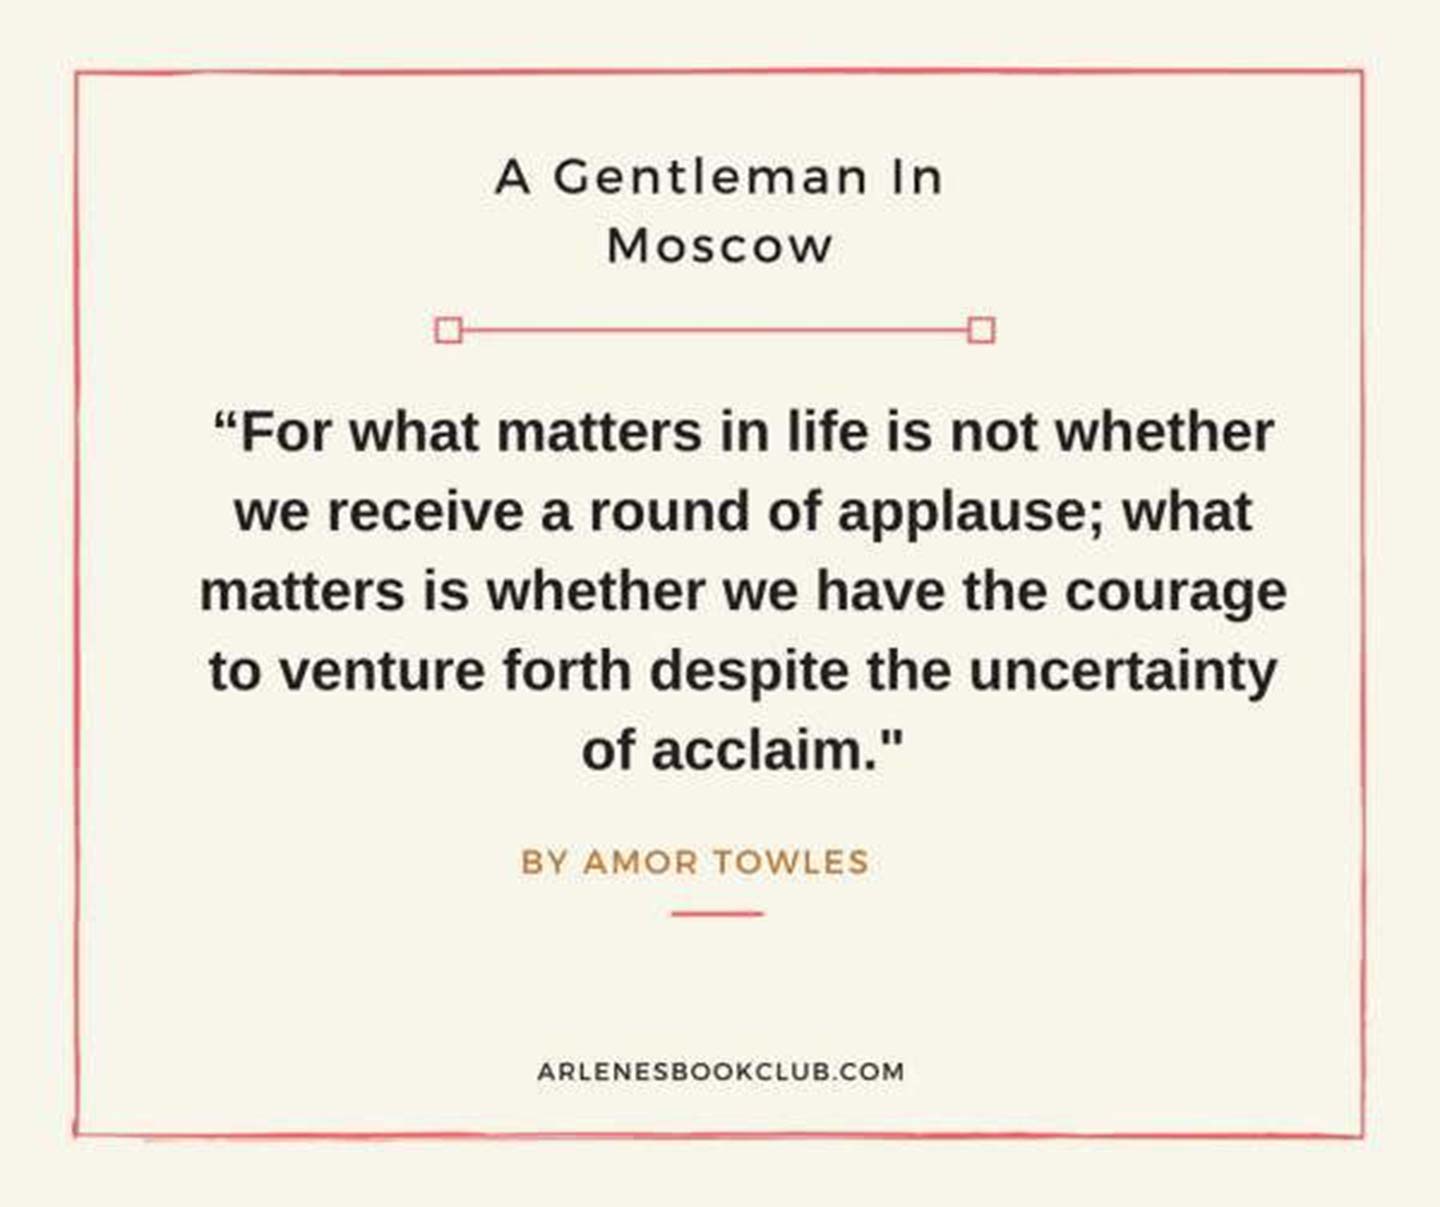 book club review december 2019 a gentleman in moscow